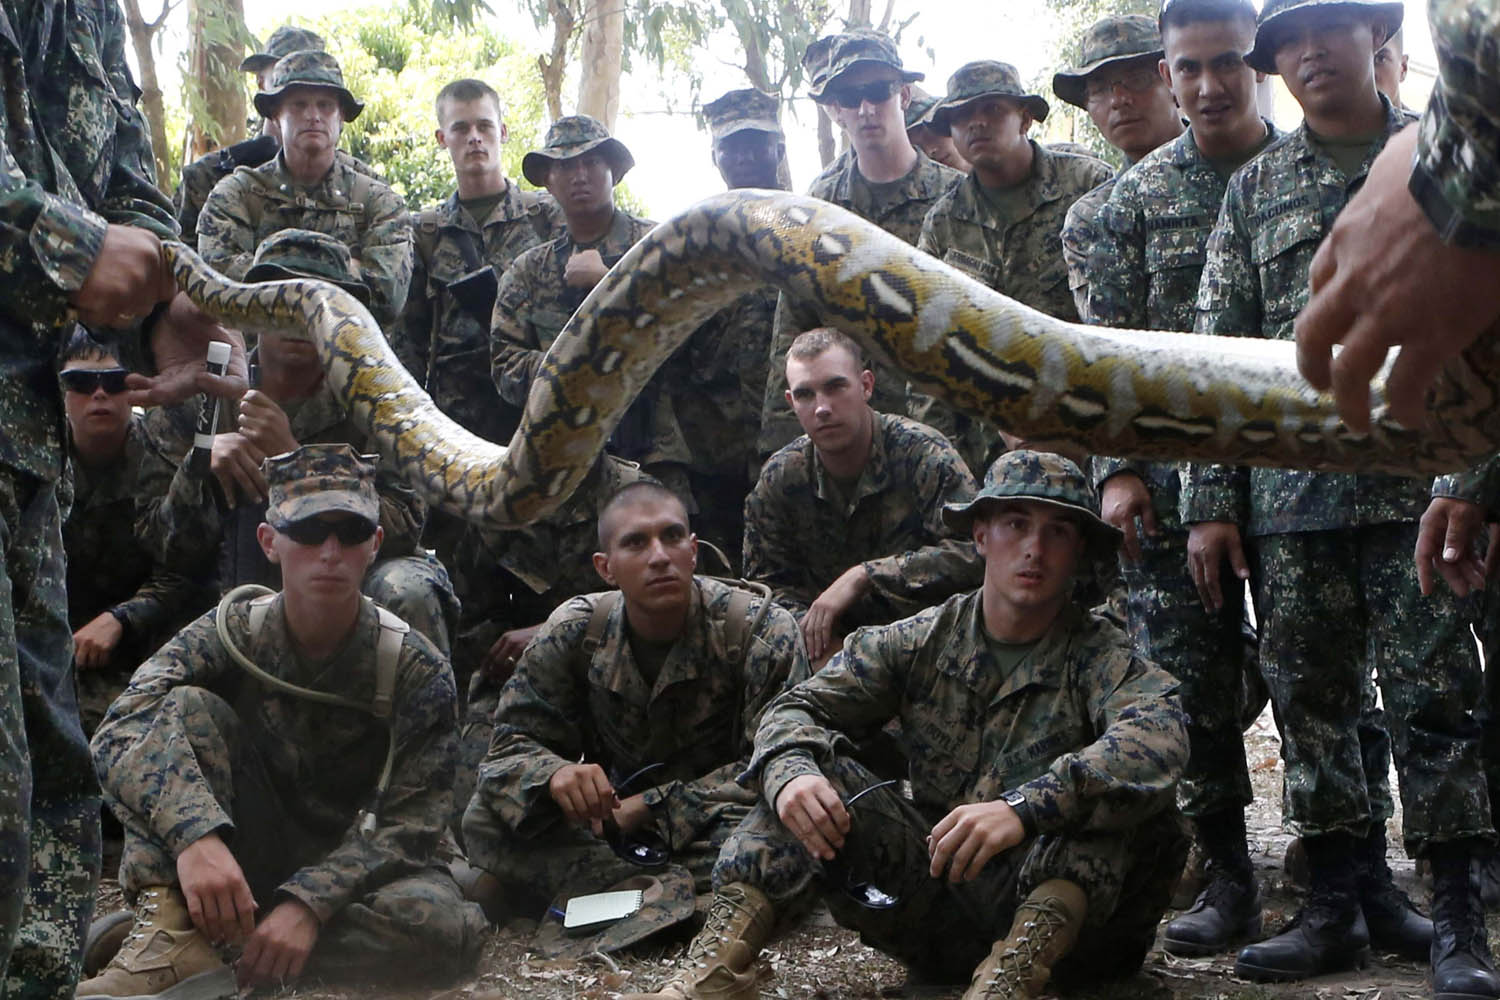 U.S. Marines look at a snake before it was slaughtered for lunch during a jungle survival training at Camp O-Donnell in Capas